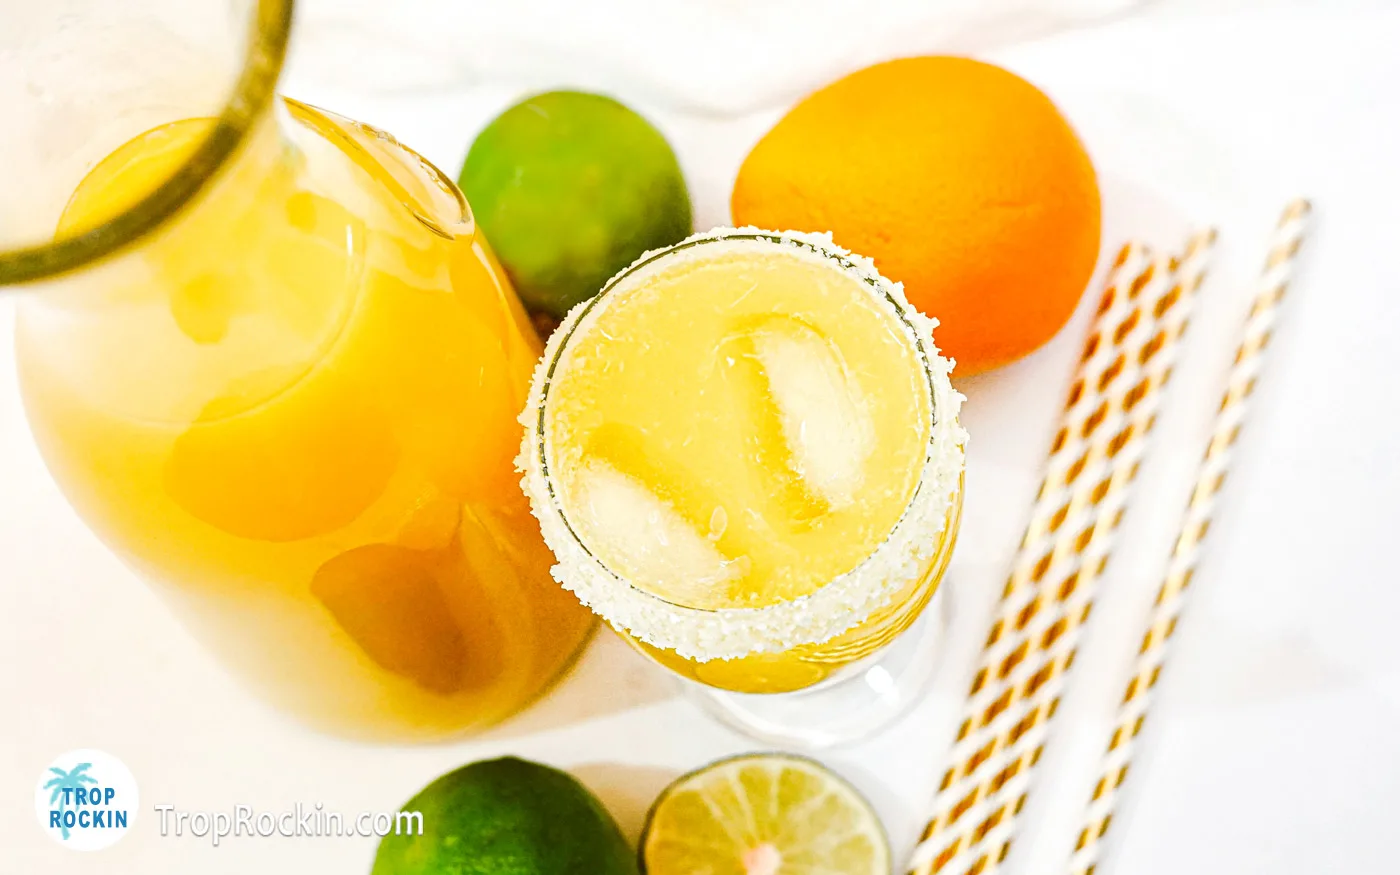 Top view of cocktail glass filled with tequila and orange juice.